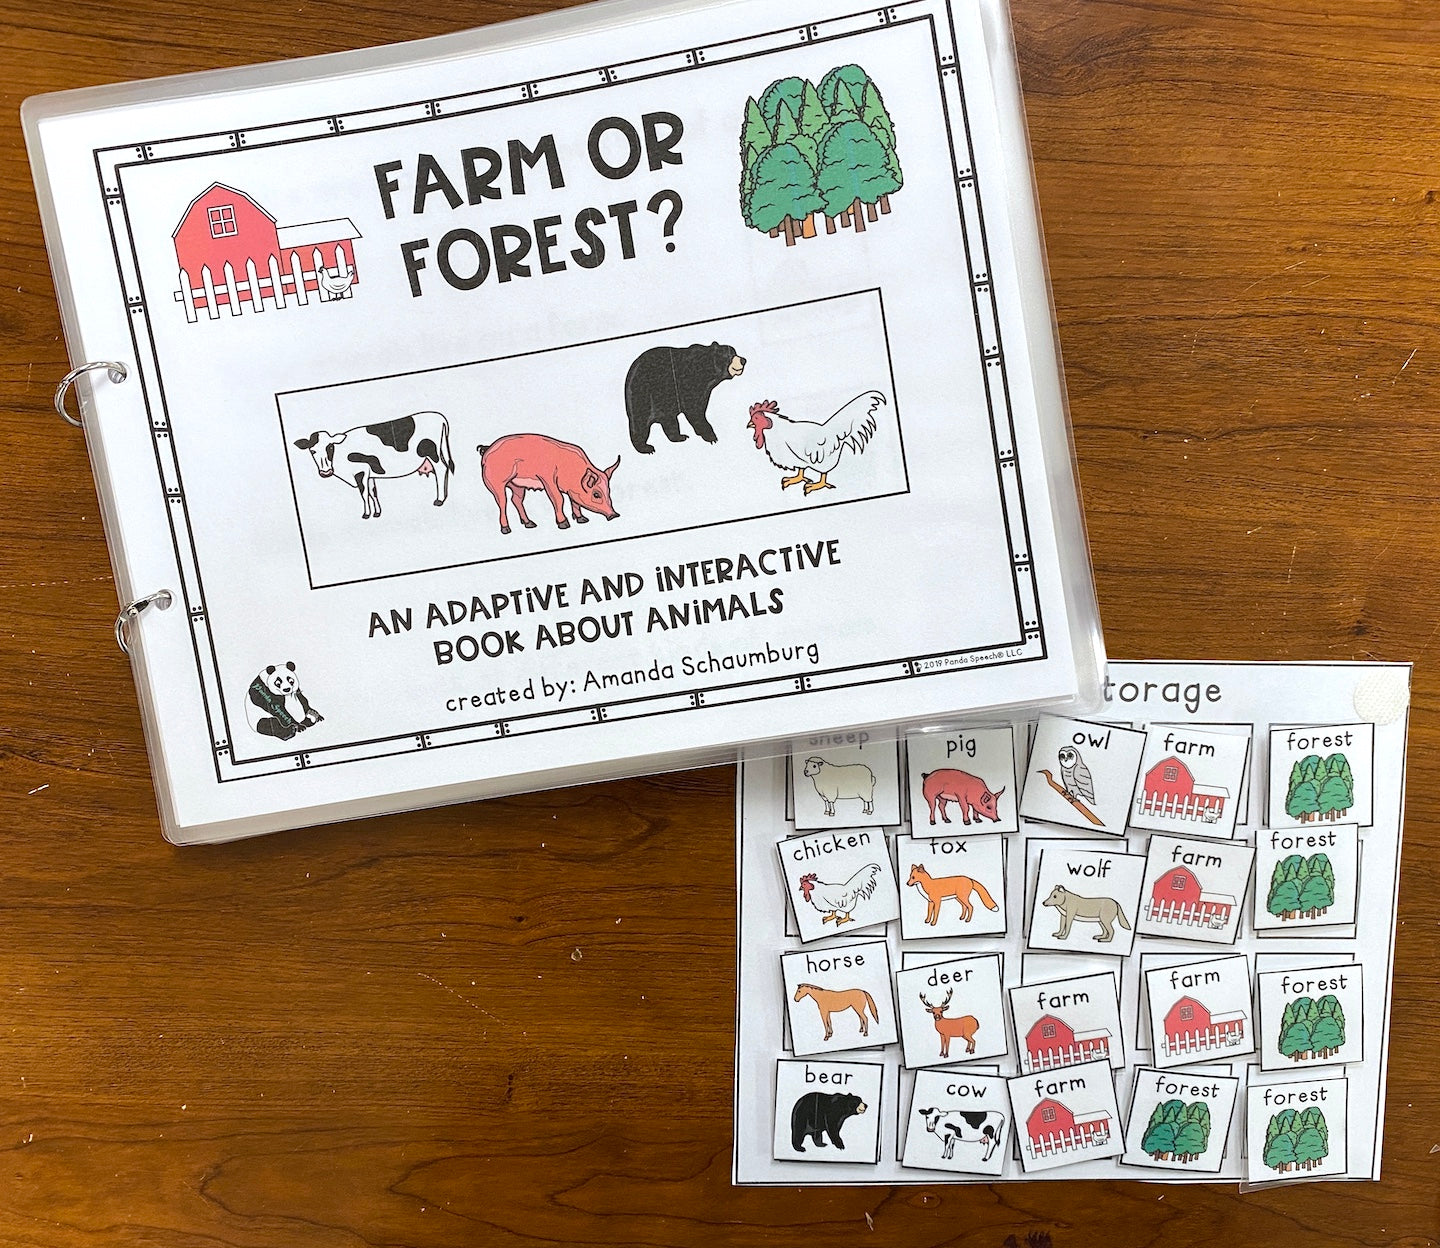 Functional Vocabulary Book: Forest or Farm Animal?  Print & Make Book